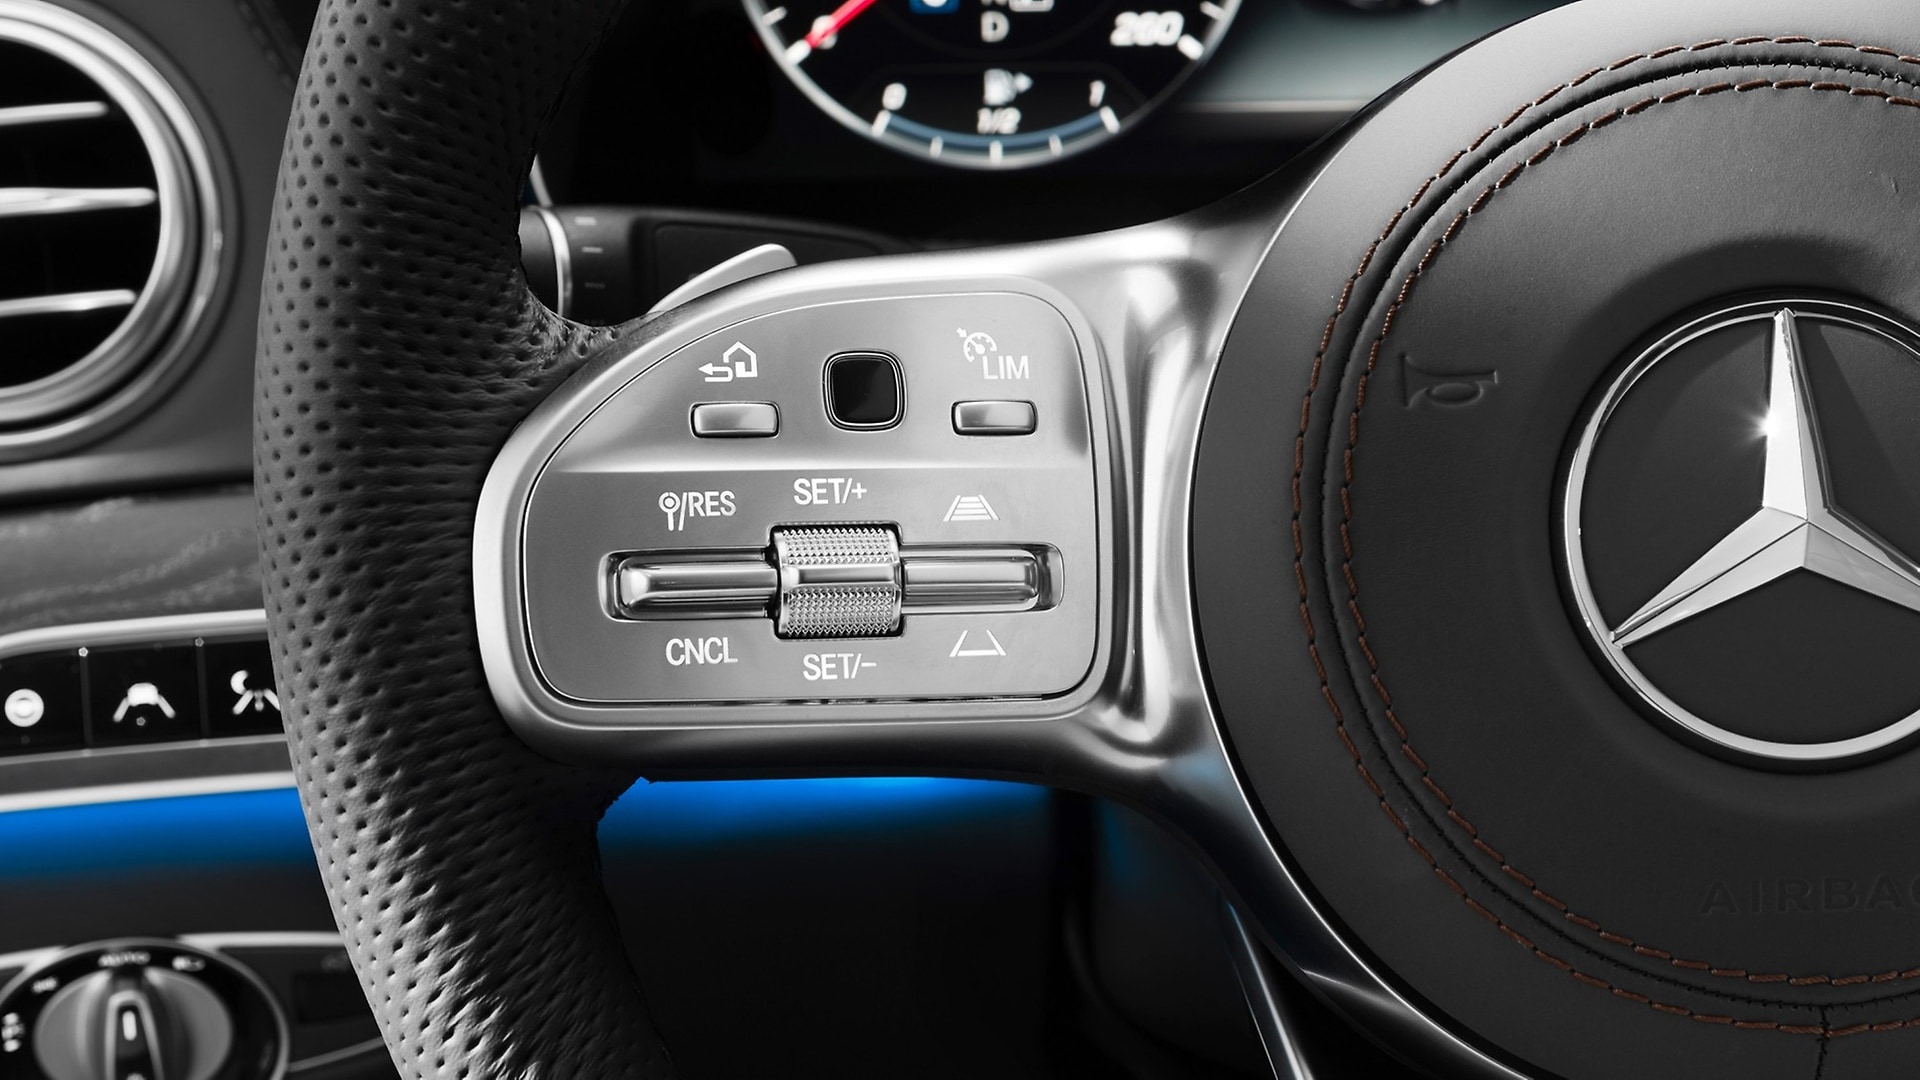 The touch control buttons enable the driver to intuitively access the functions of the head unit.